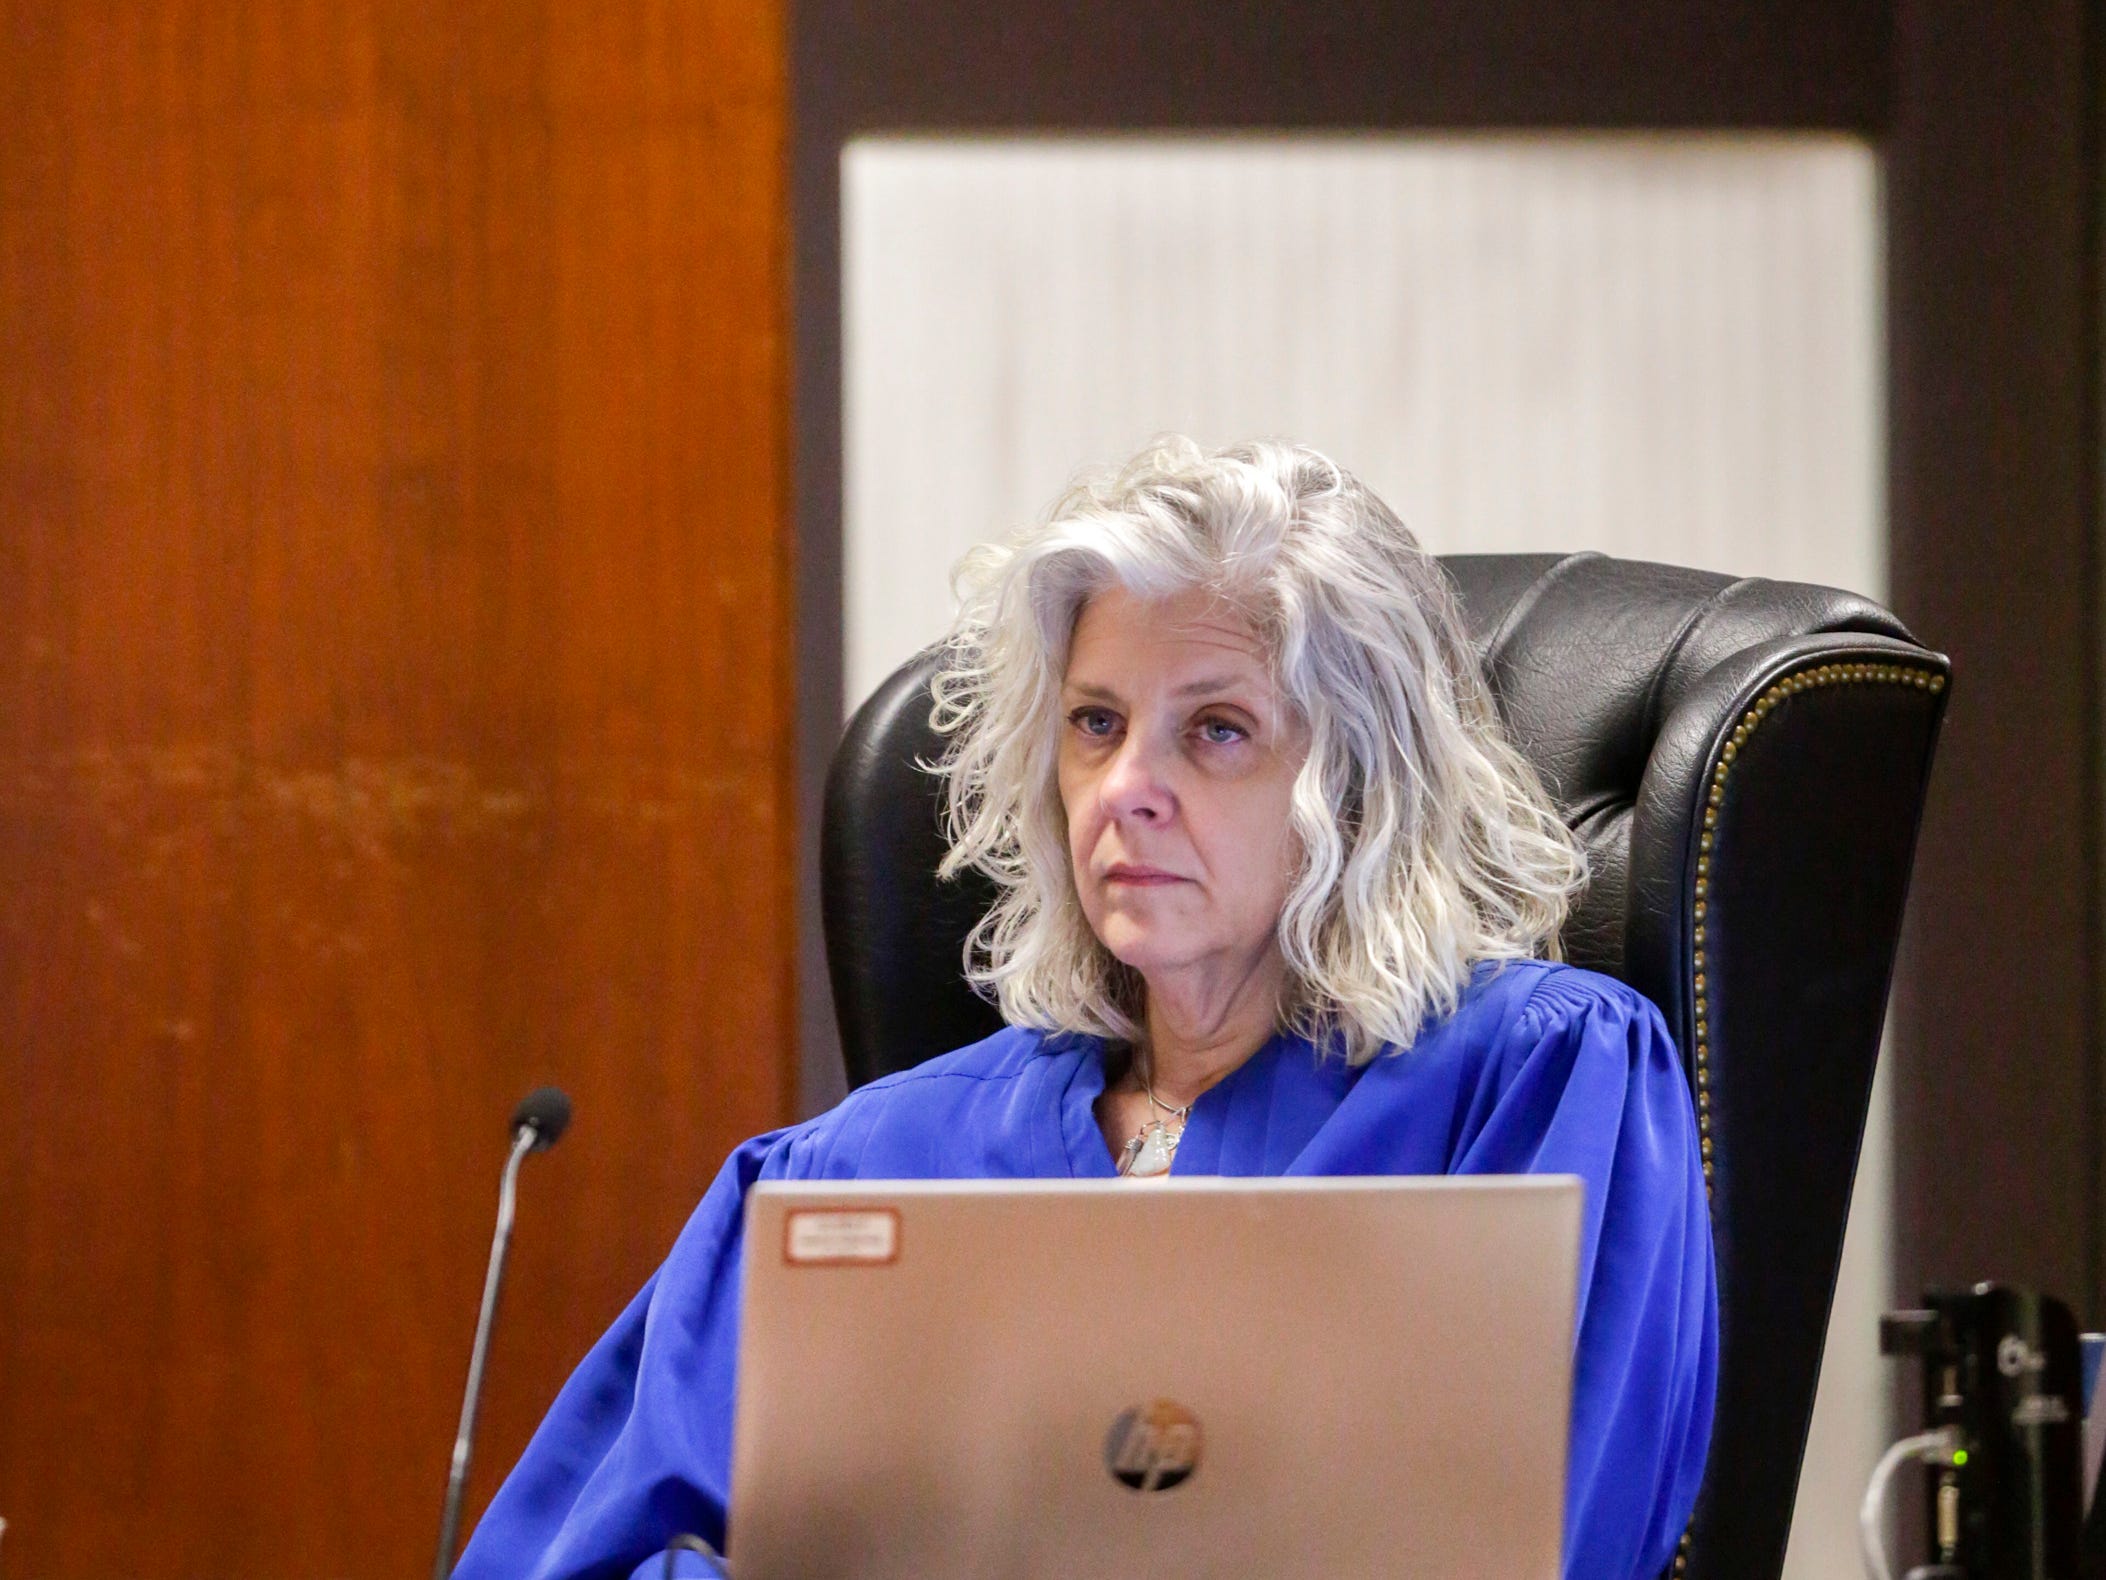 Sixth Judicial District Judge Fae Hoover listens to witness testimony during the trial of Jerry Burns at the Scott County Courthouse in Davenport on Wednesday, Feb. 12, 2020.